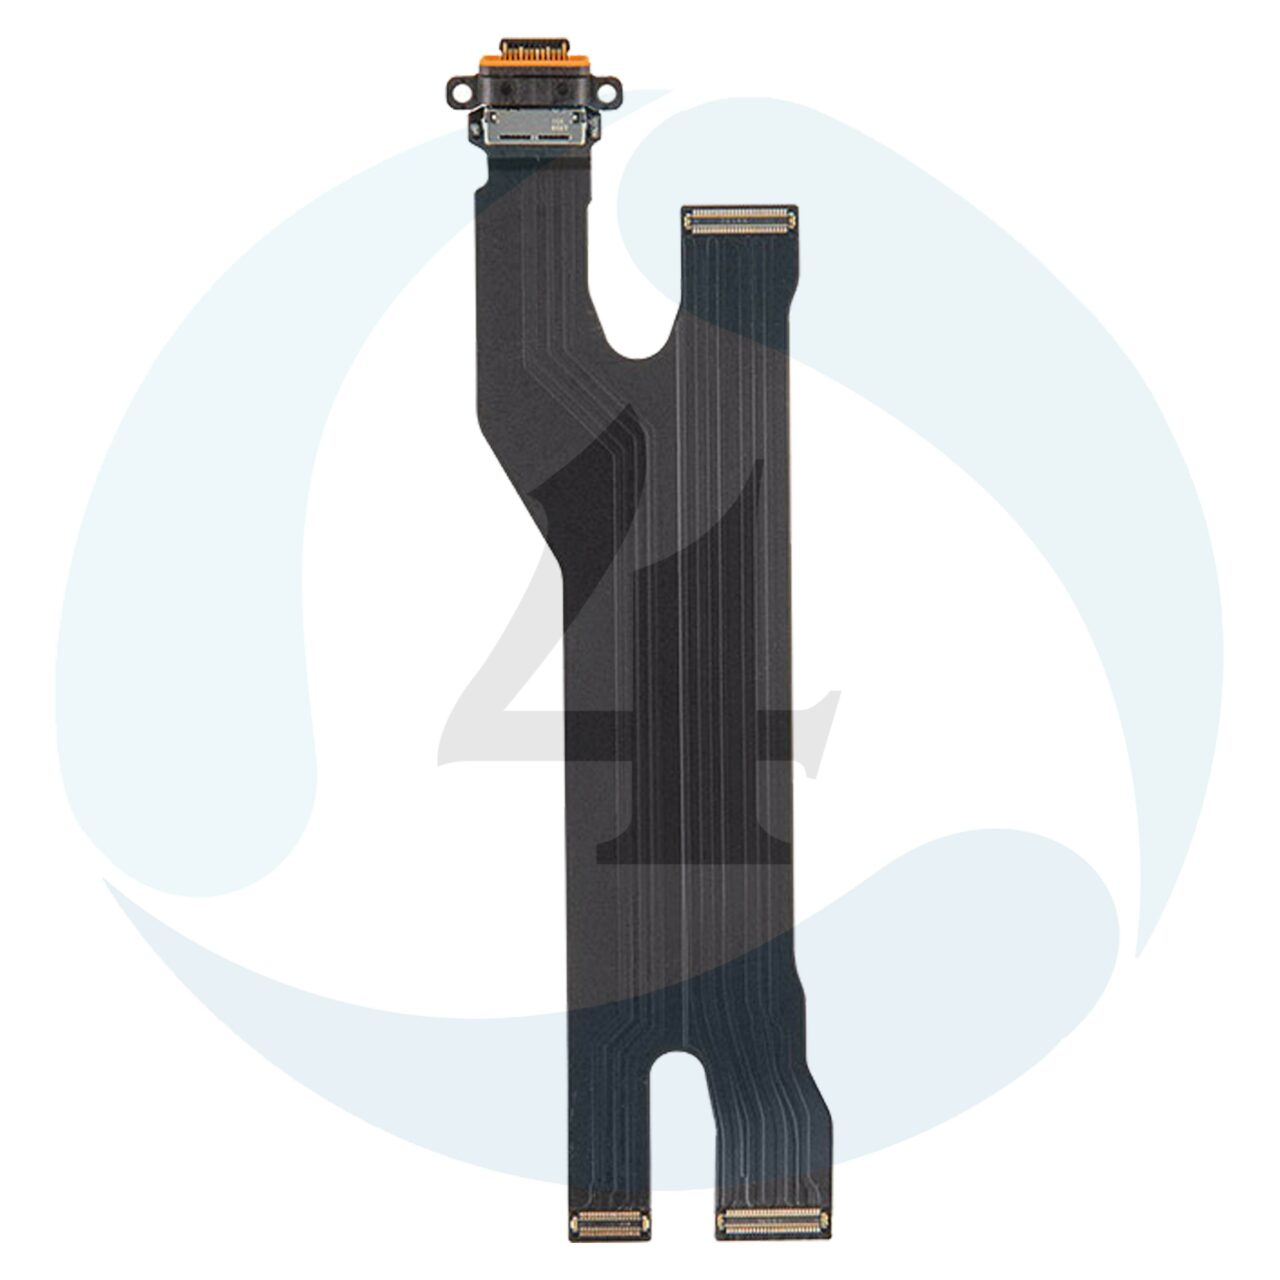 Huawei P30 Pro Charging Connector Flex Cable